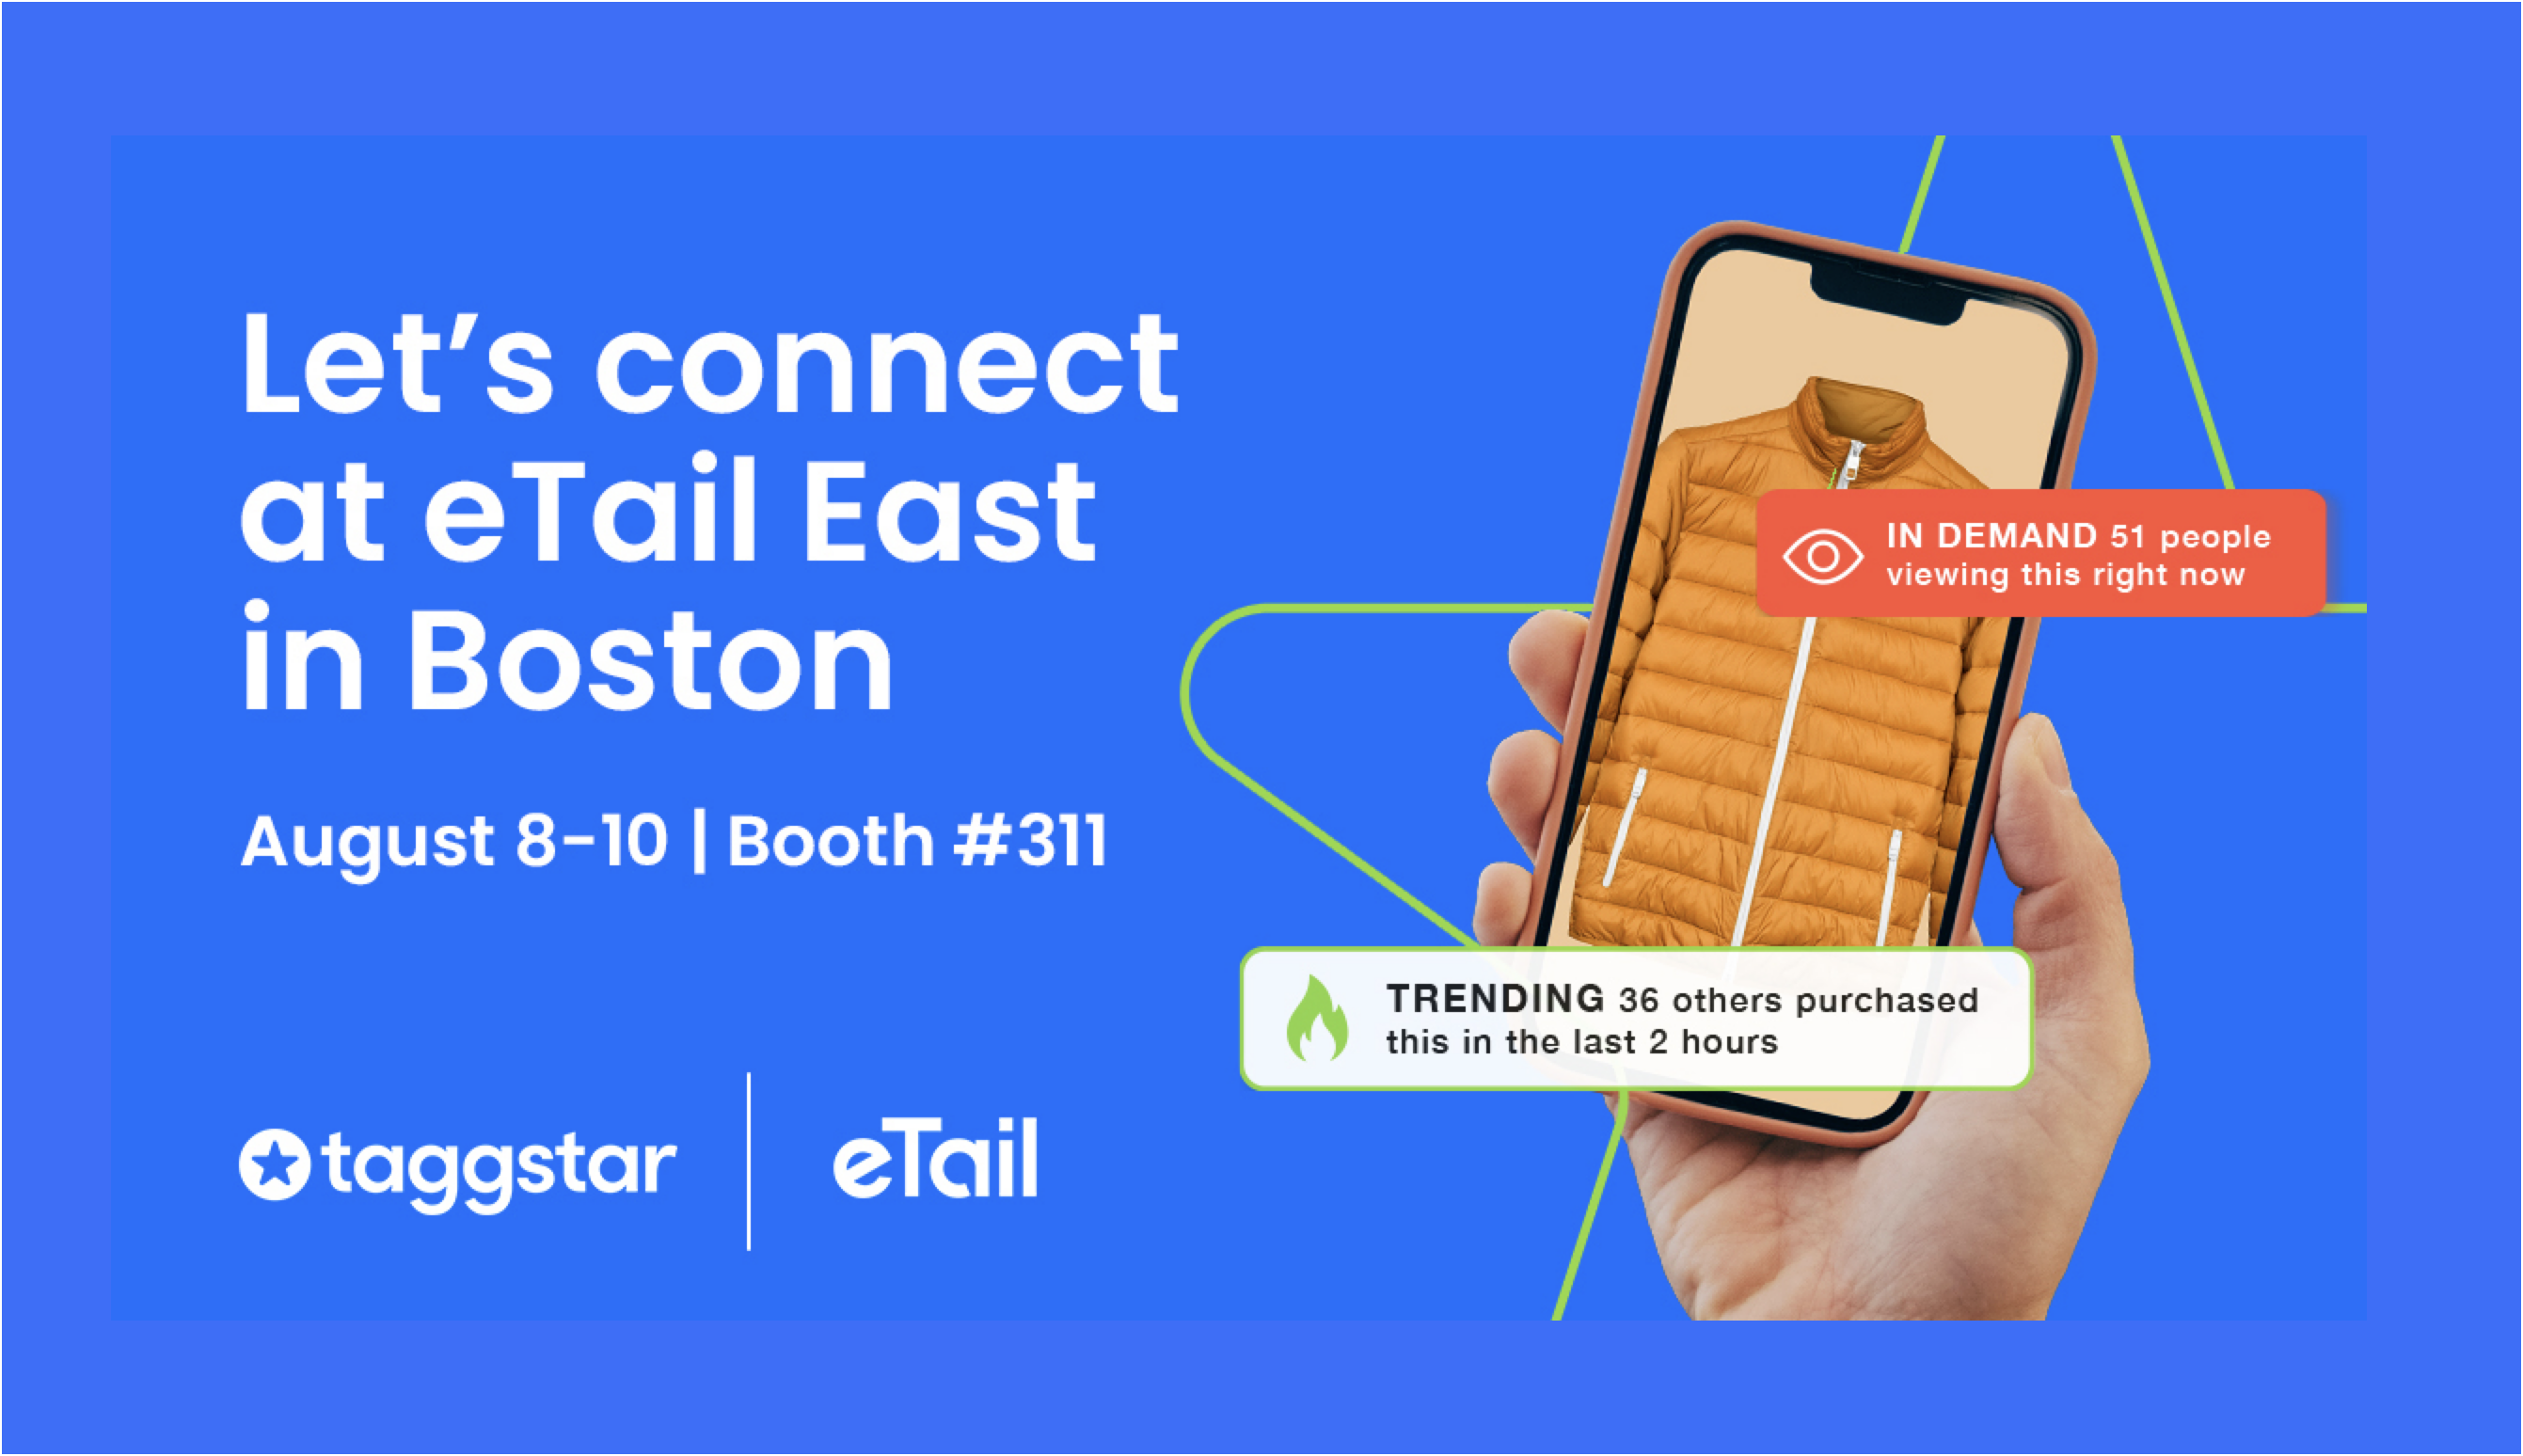 Taggstar will be at eTail East 2022! Taggstar